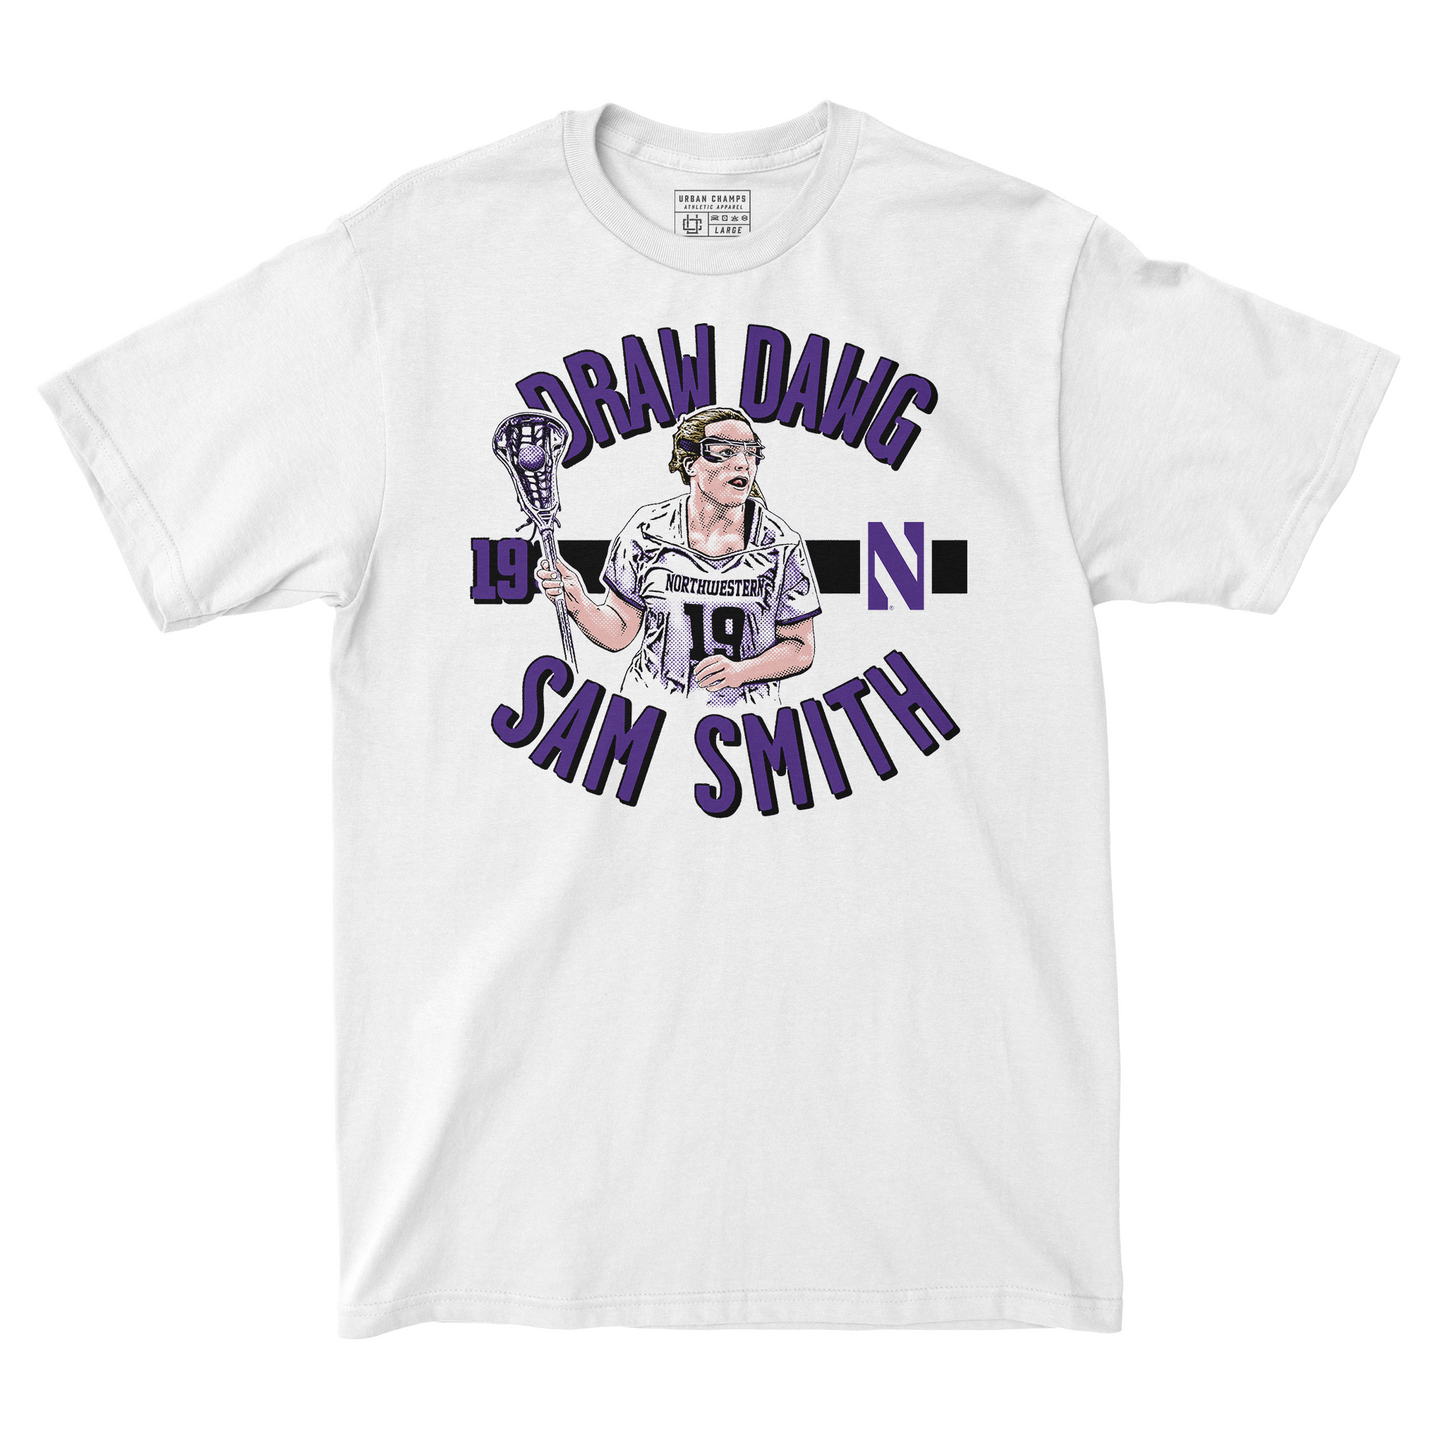 EXCLUSIVE RELEASE: Sam Smith - Draw Dawg Tee